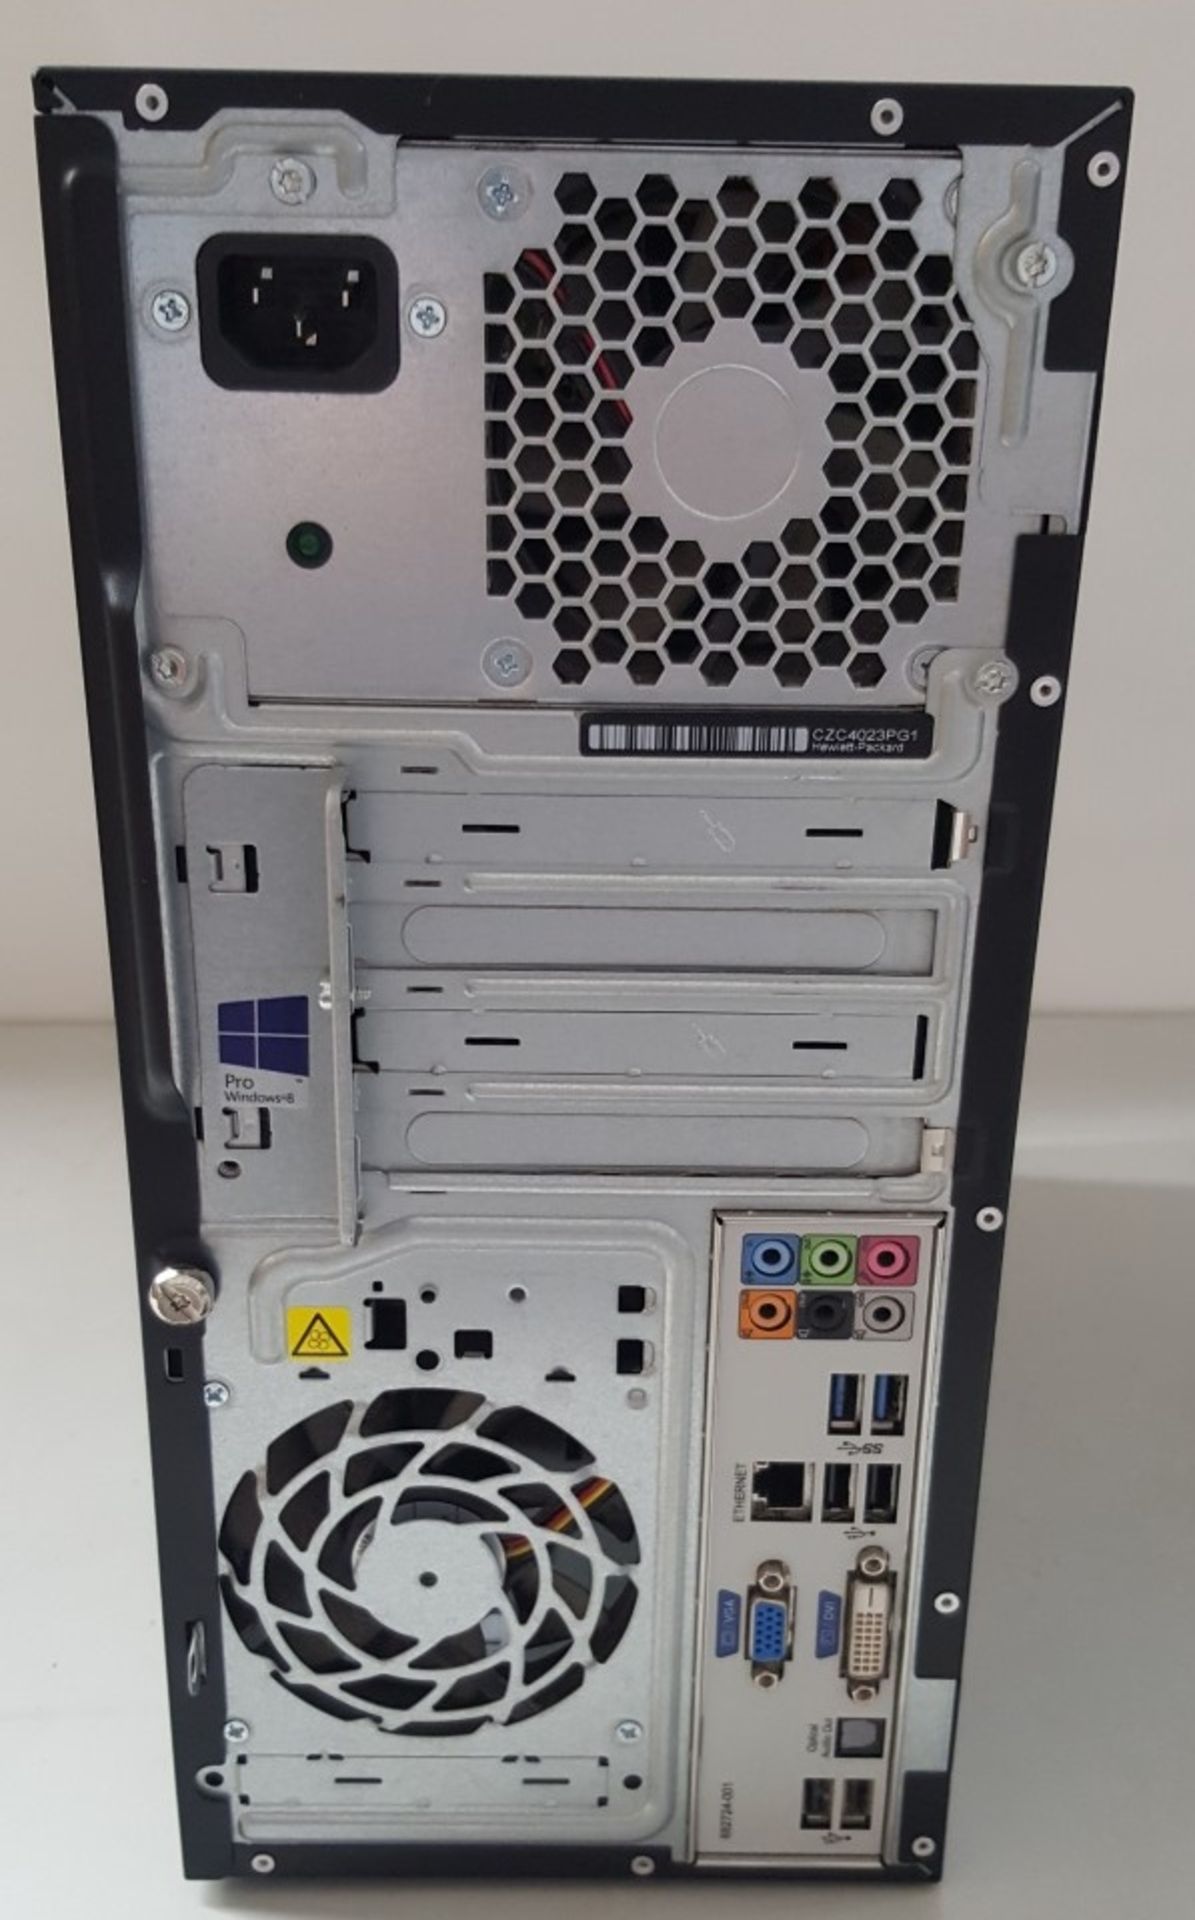 1 x HP Pro 3515 MT AMD A6-5400K 3.60GHz 4GB RAM Desktop PC - Ref BLT103 - Image 3 of 5